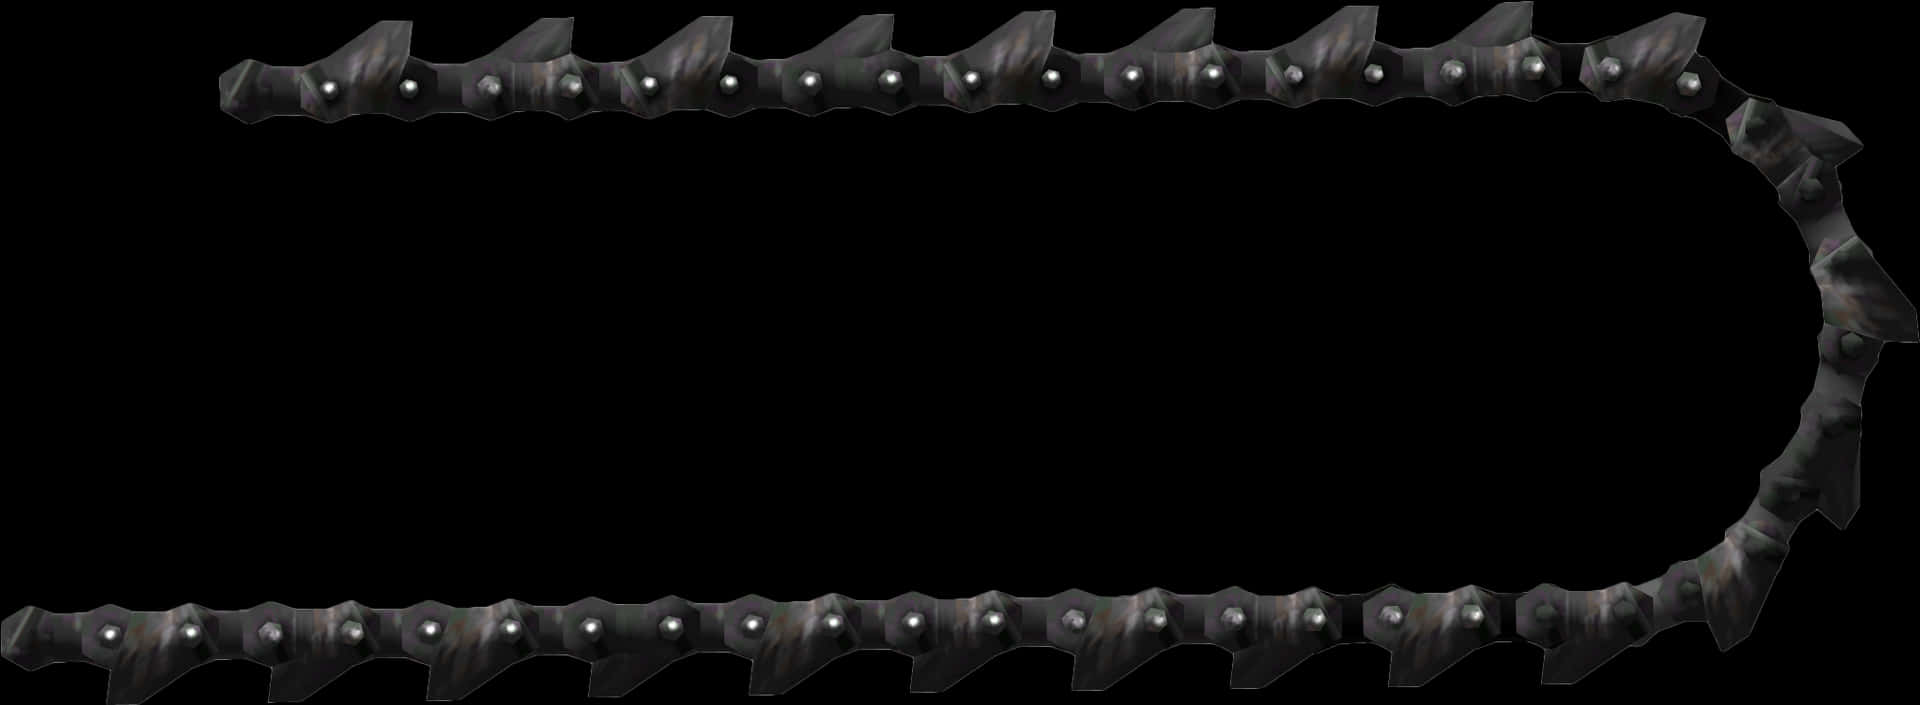 Metallic Spiked Chain Frame PNG image